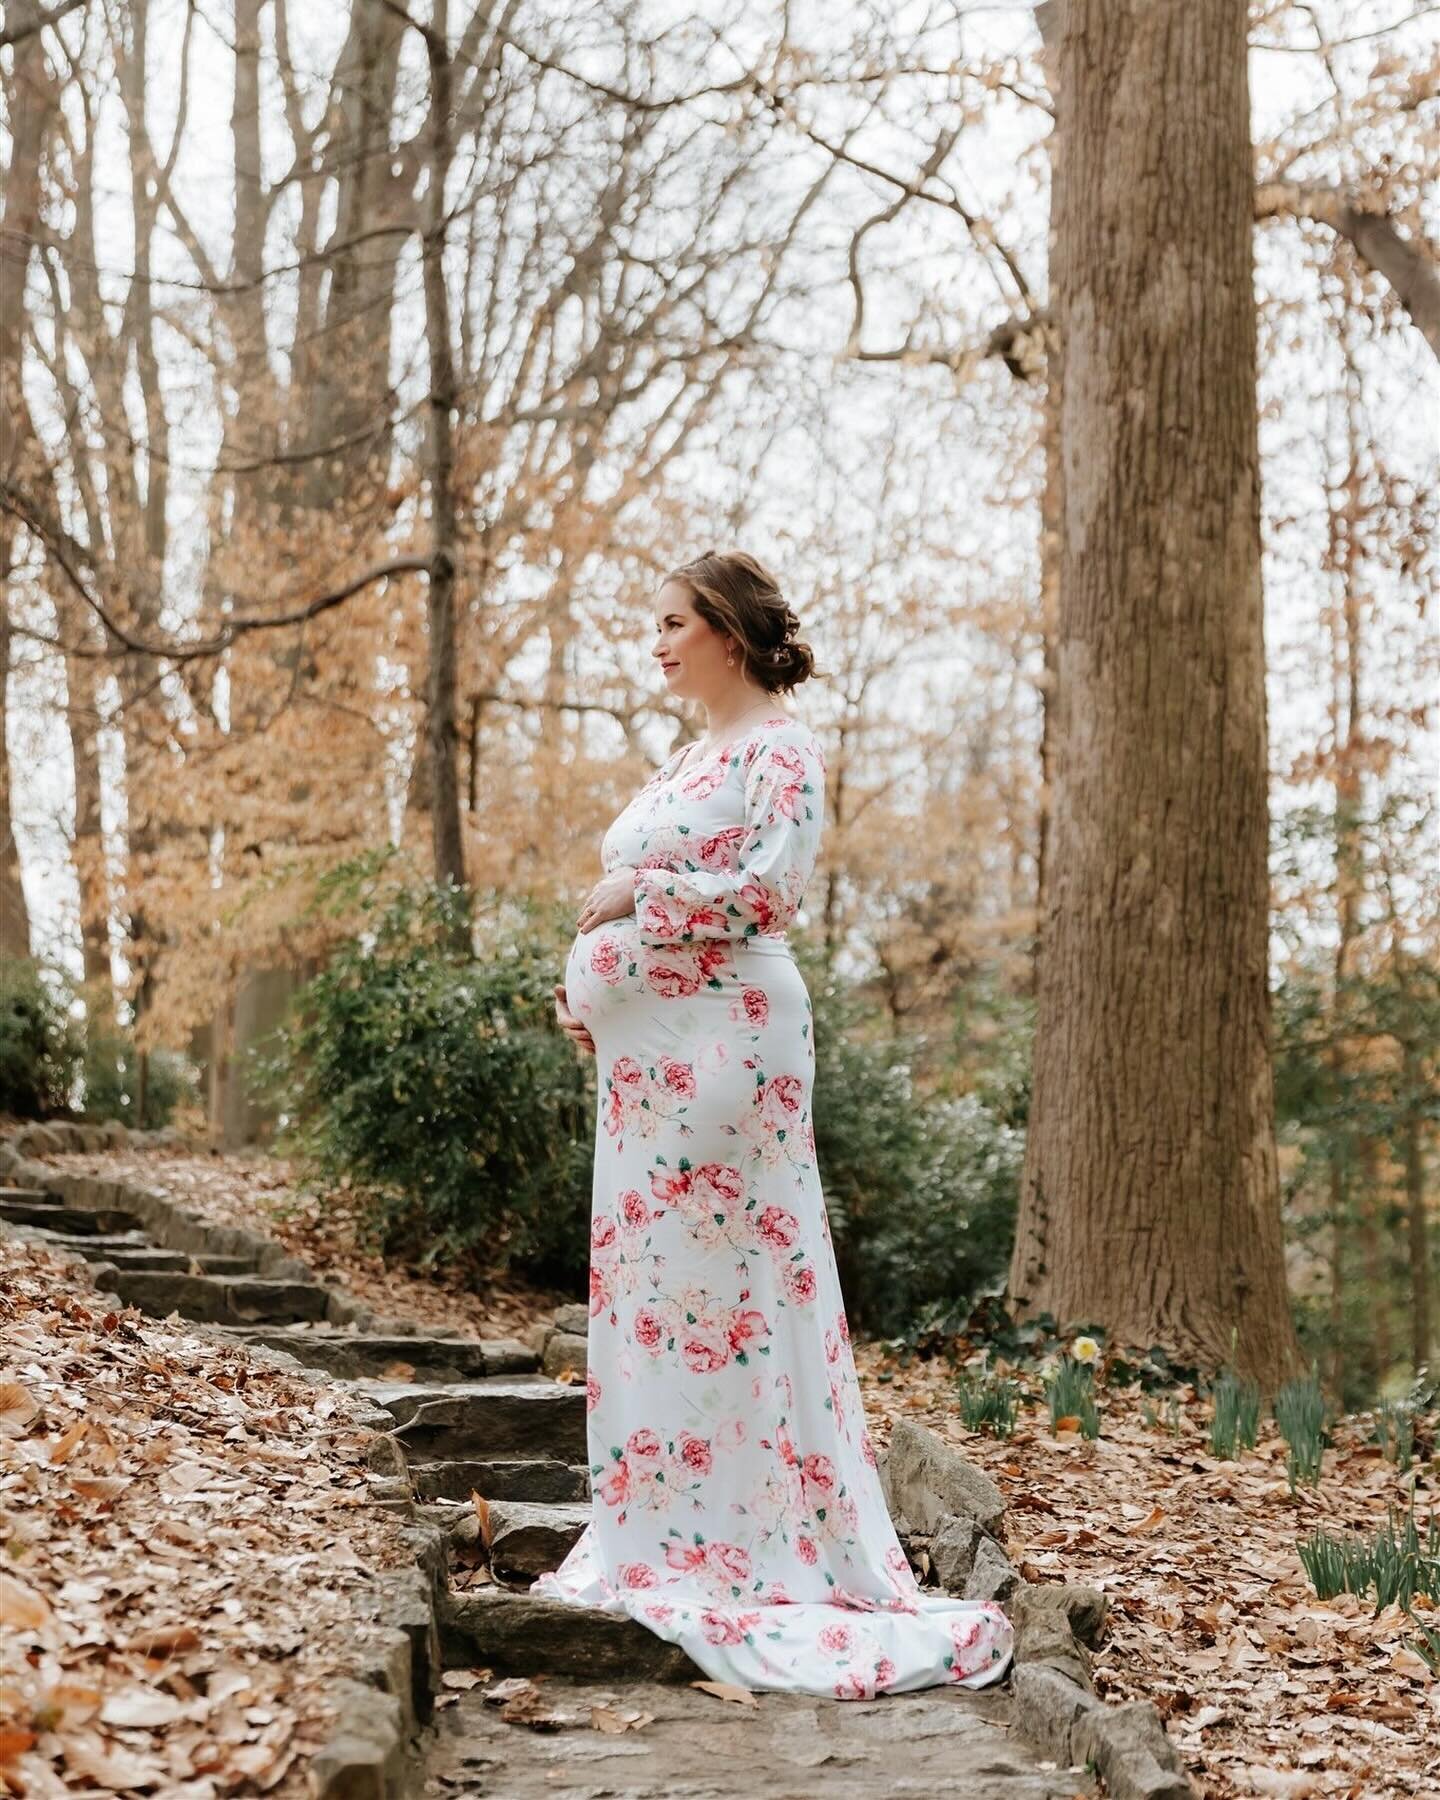 A few weeks ago, I had the joy of reconnecting with Jessica and Bhavin for their maternity session. It&rsquo;s been a handful of years since their wedding, so it was wonderful having a moment to catch up! I&rsquo;m so excited for them, and know they&